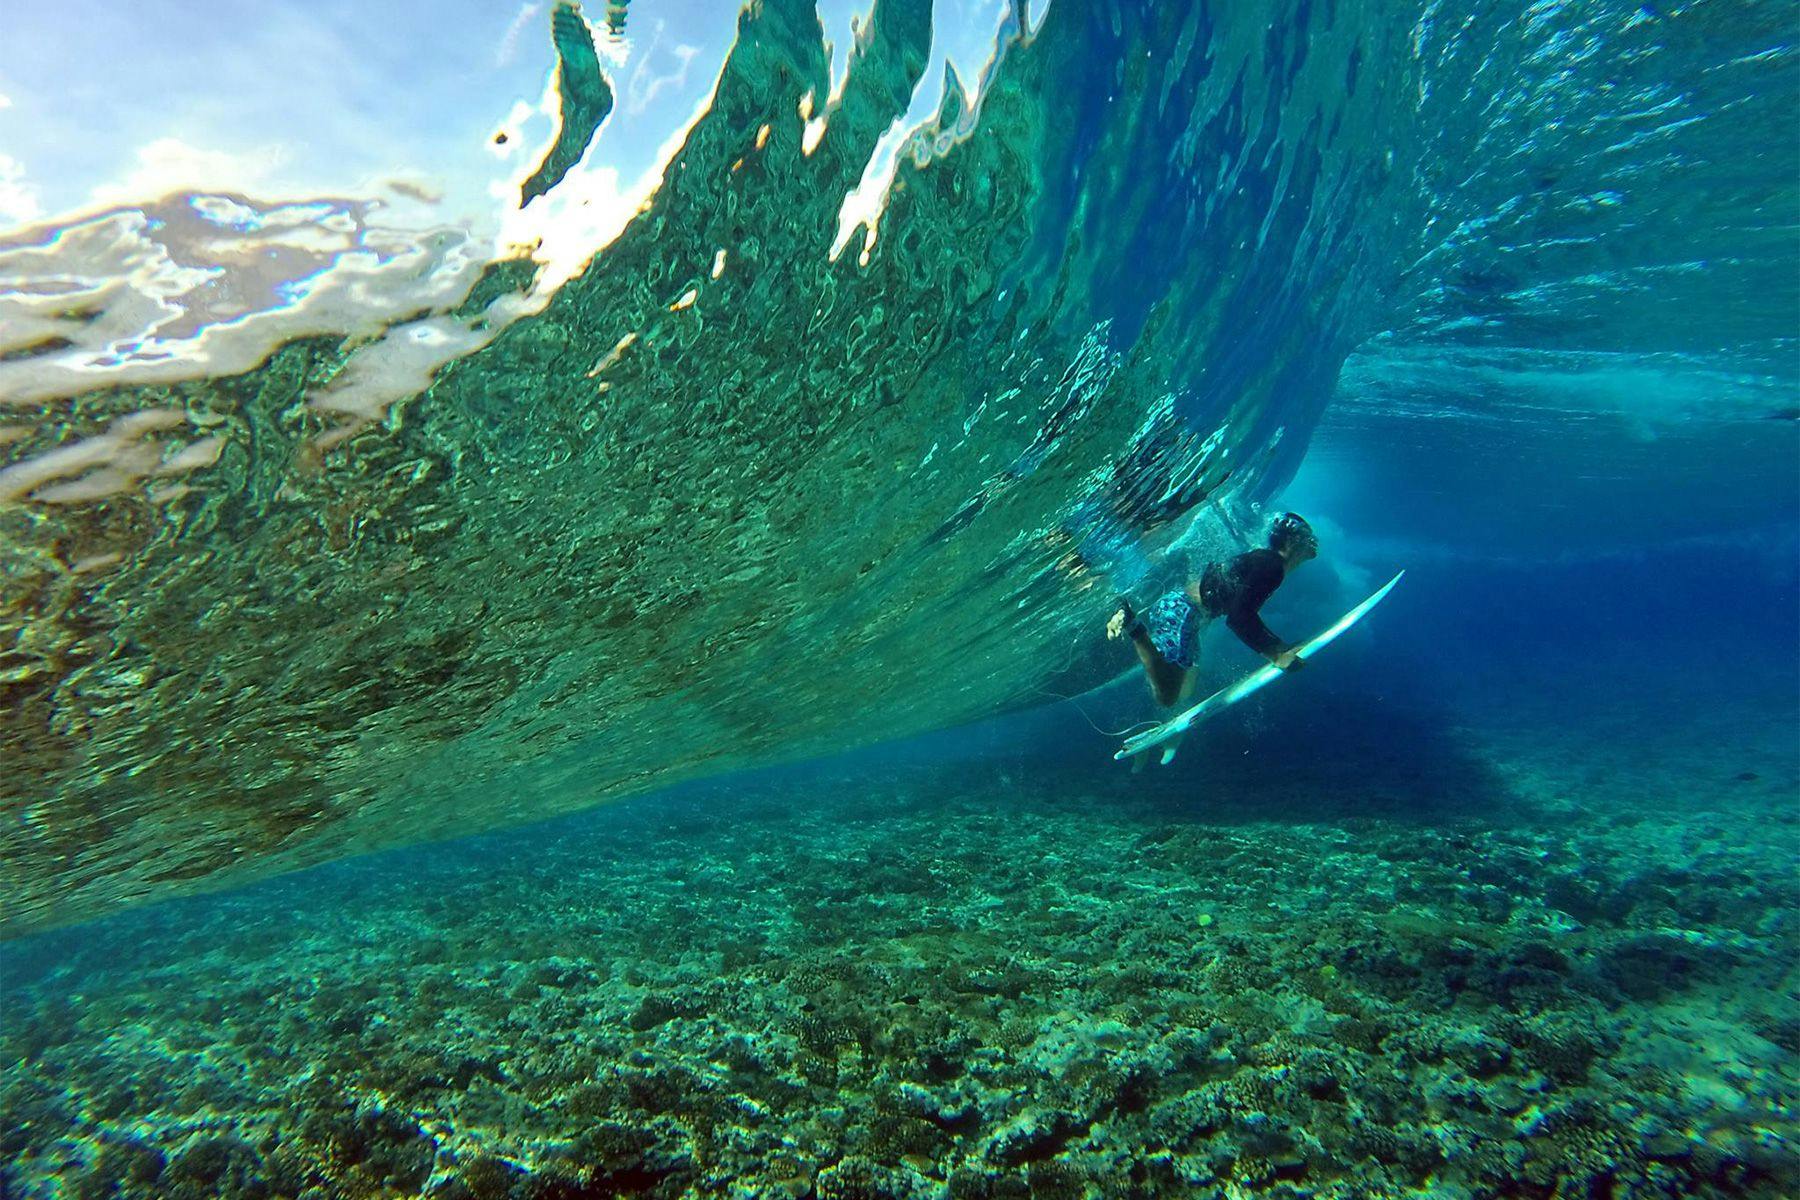 surfer duckciving a wave over coral reef in tahiti by nick stokes